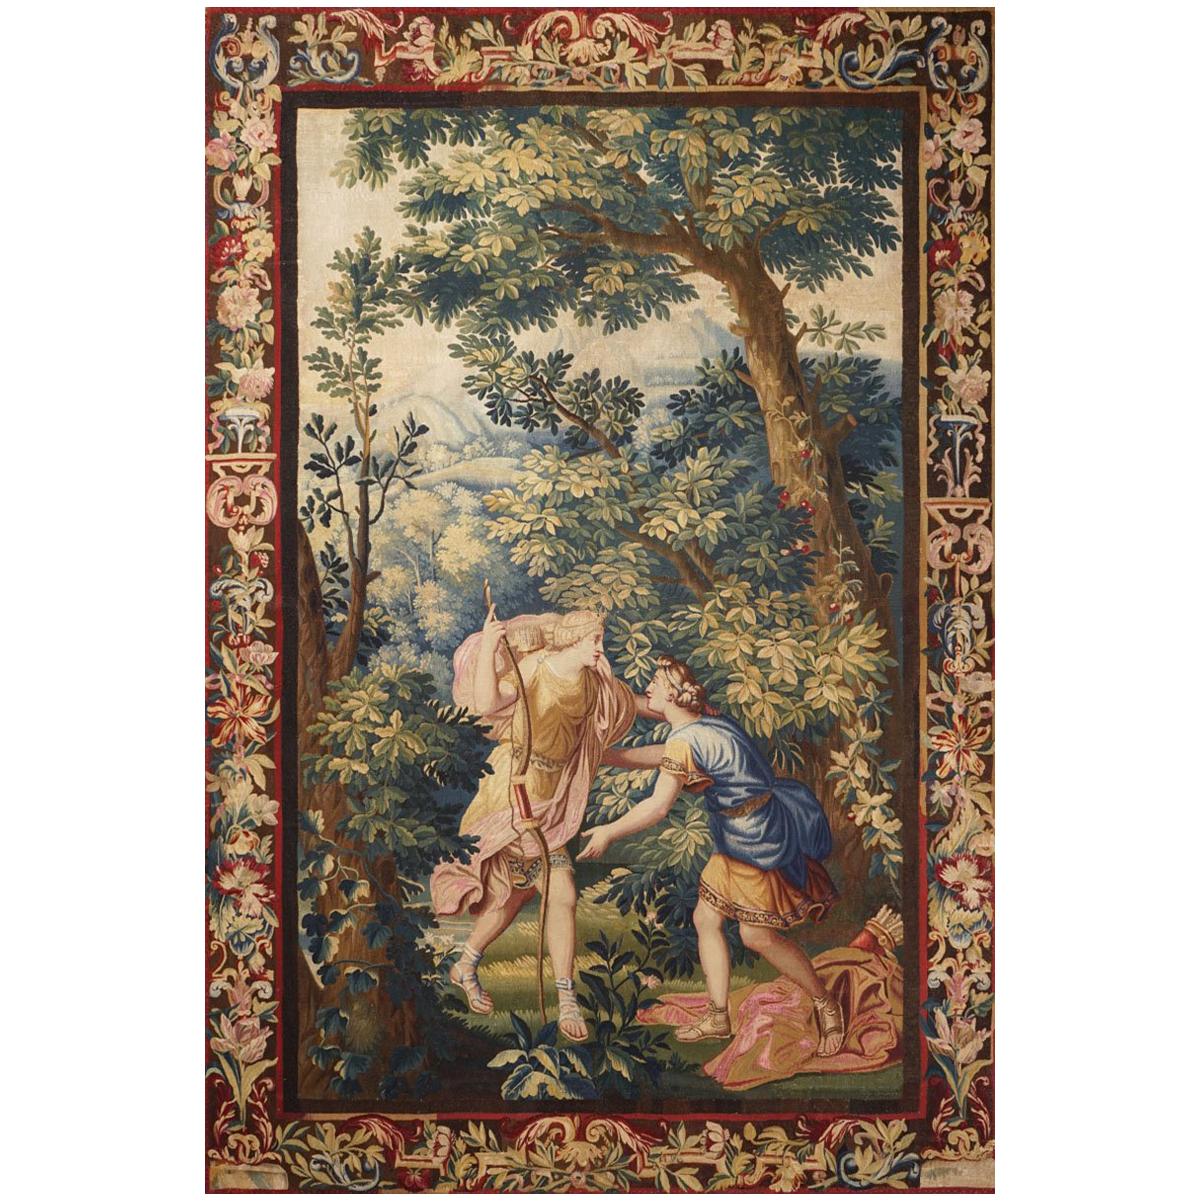 18th Century antique tapestry from Brussels - "Diana and Endymion"